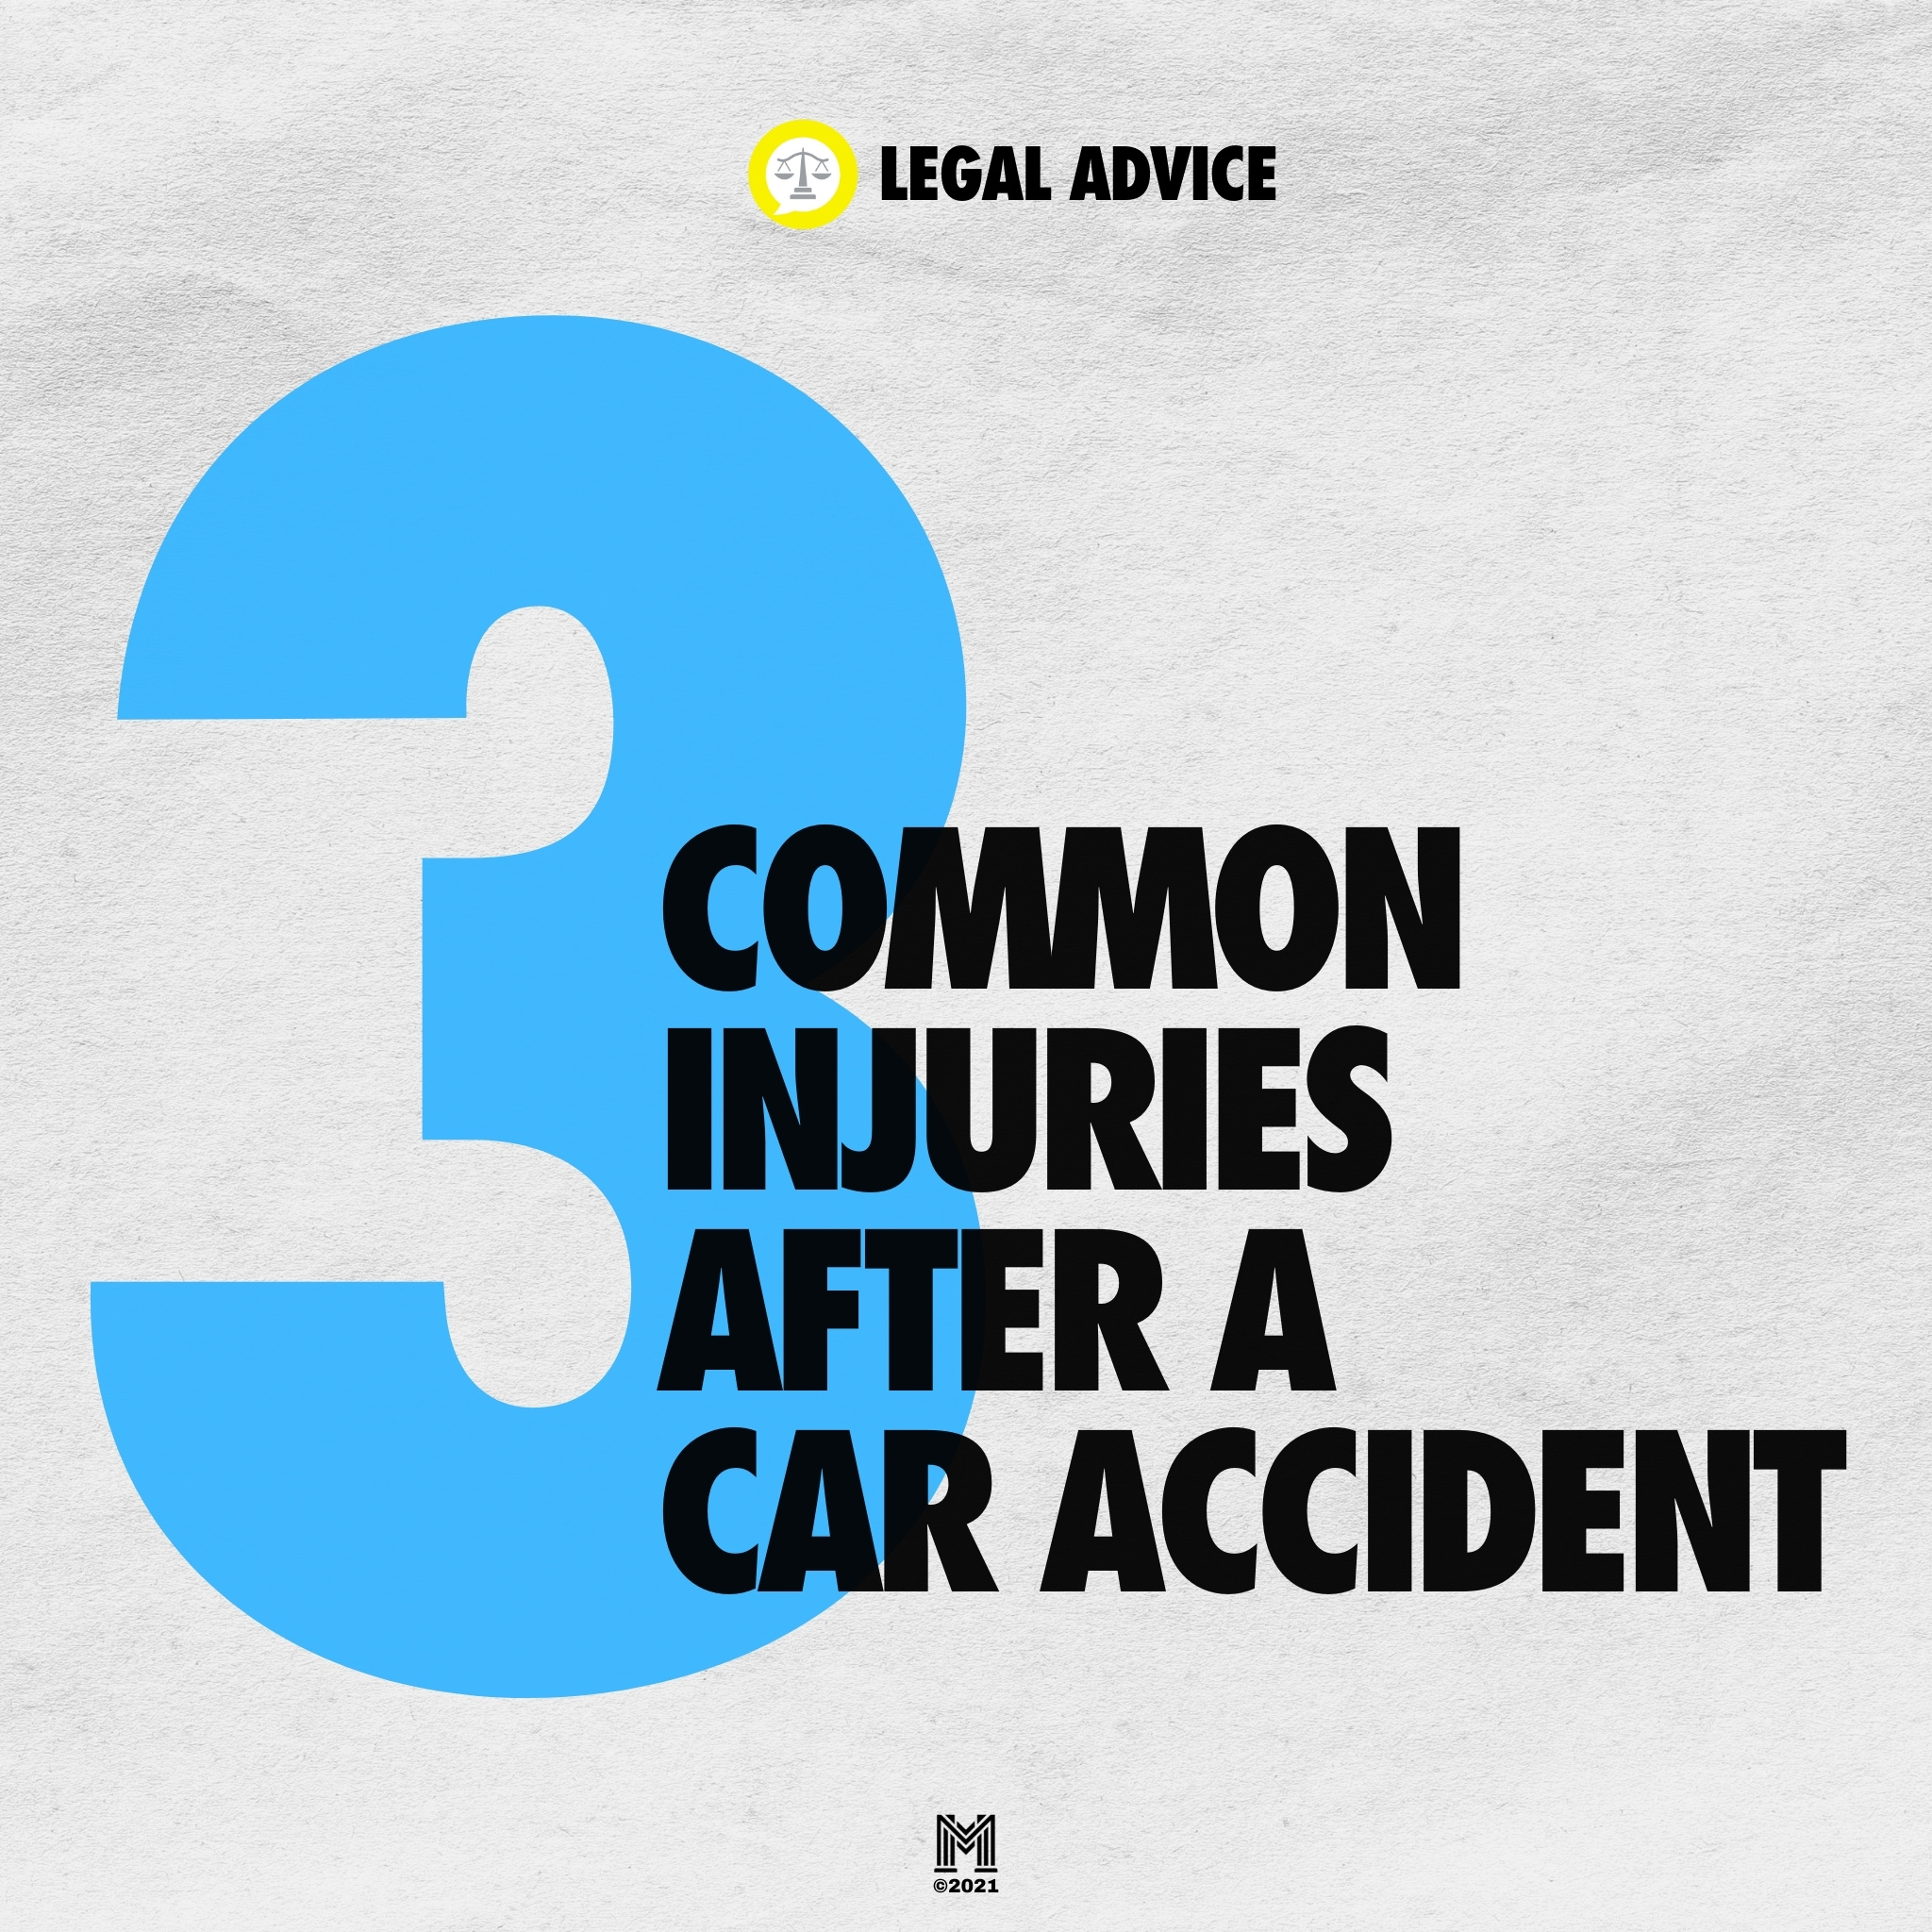 3 Common Injuries After a Car Accident